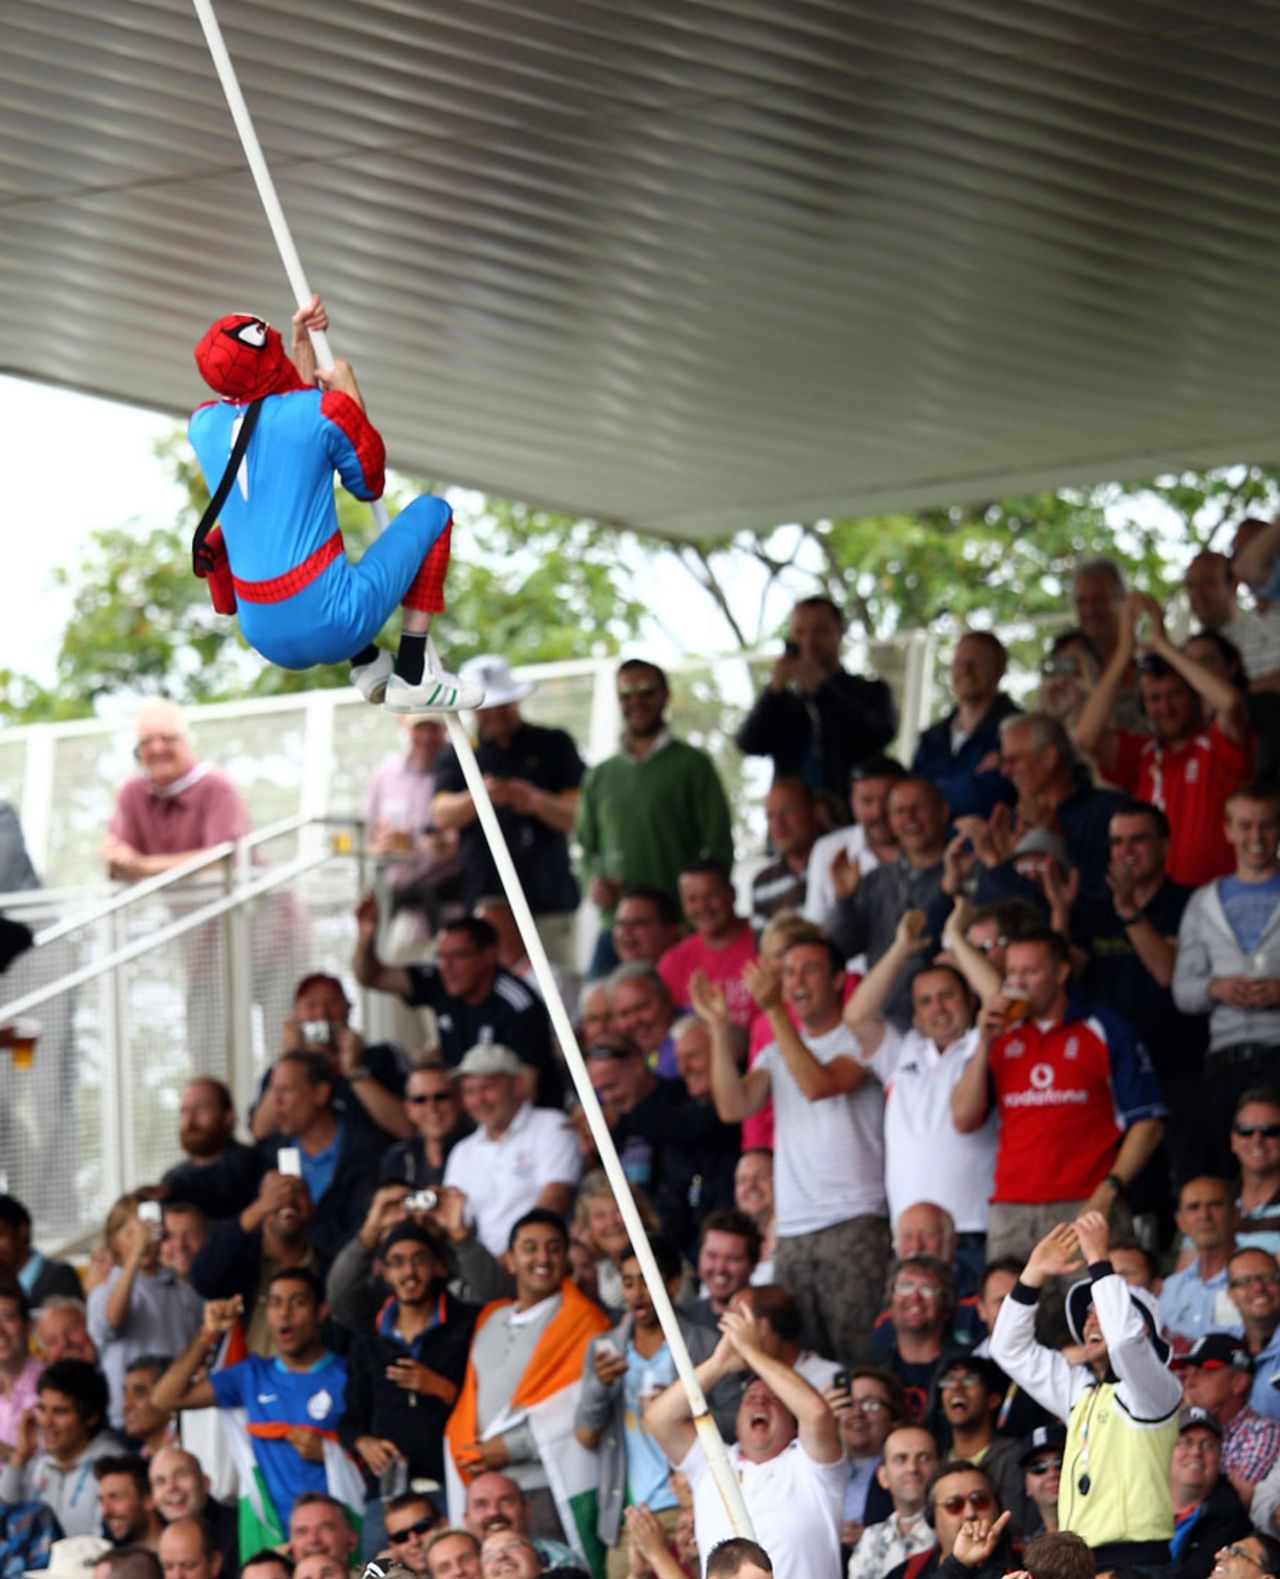 A man dressed as Spiderman catches the crowd's attention, England v India, 3rd Test, Edgbaston, 4th day, August 13, 2011